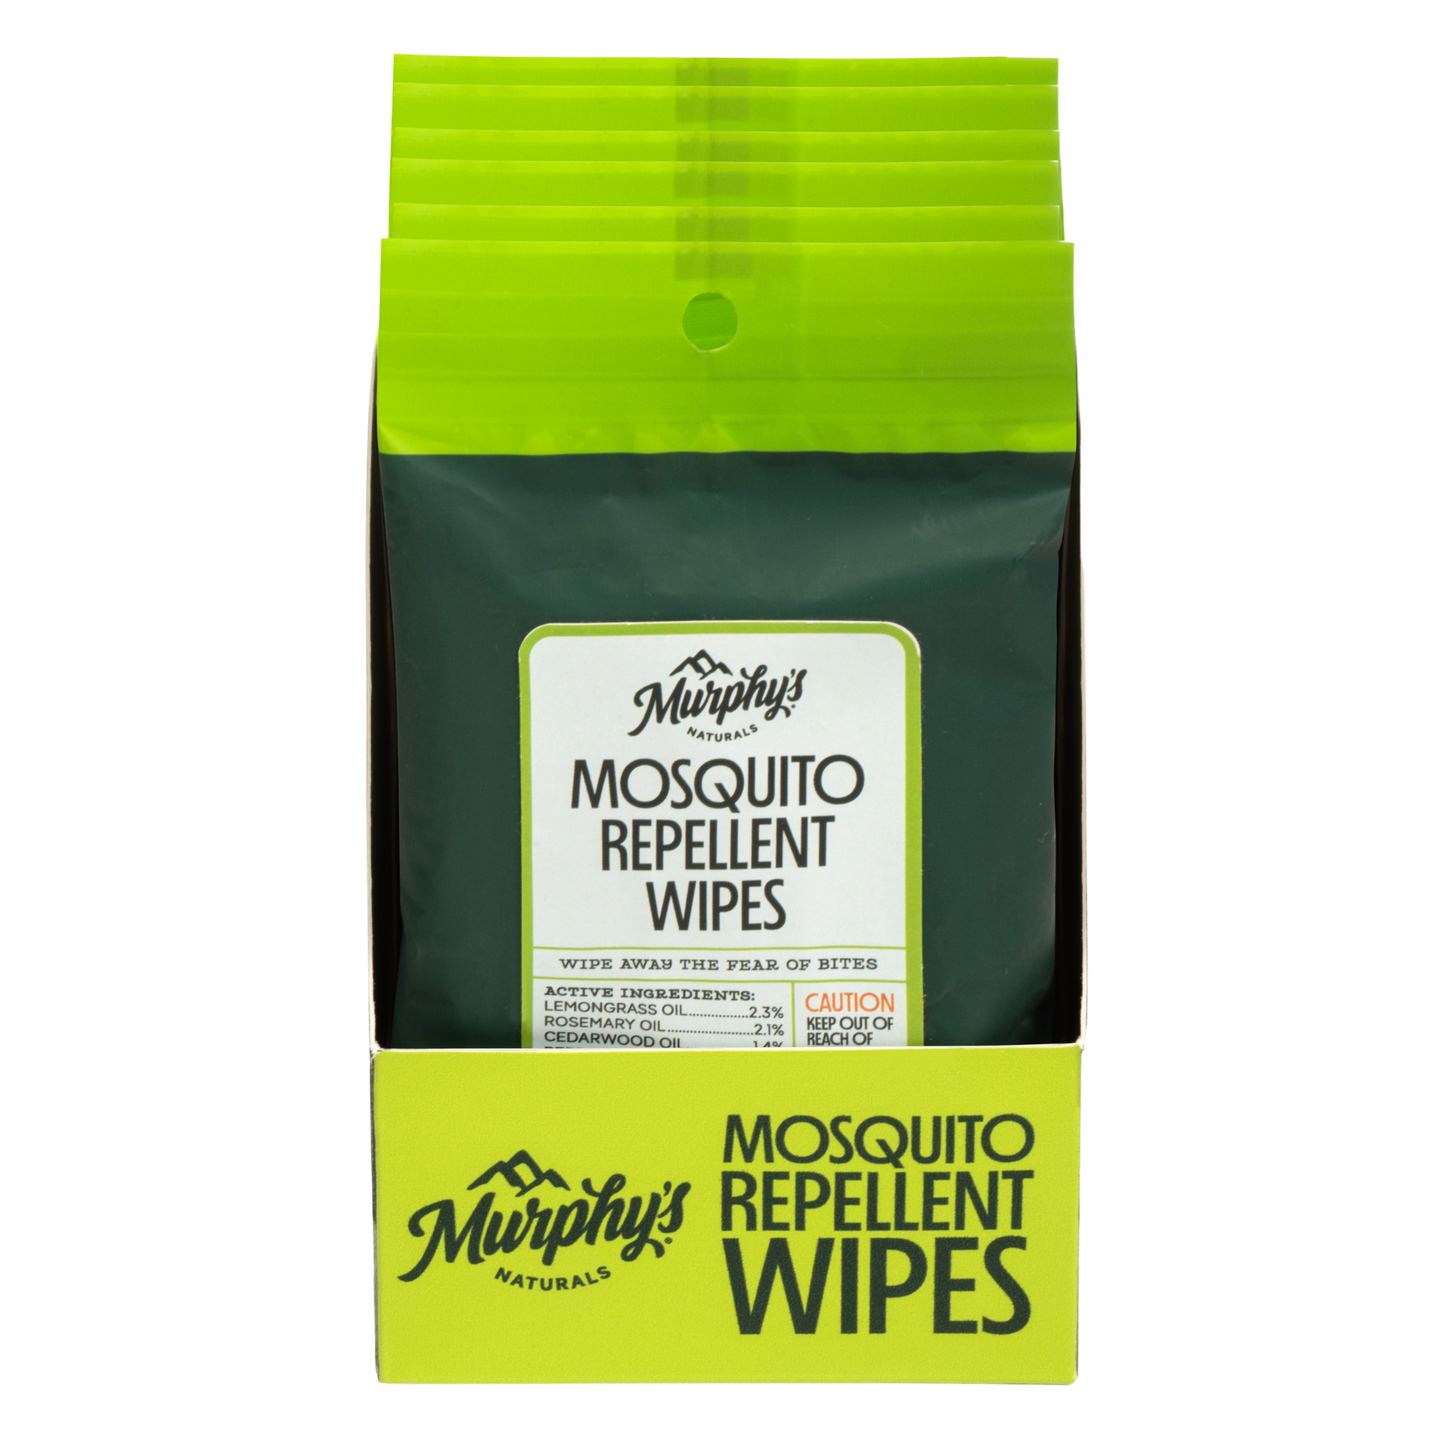 Mosquito Repellent Wipes (10ct) - Display of 6